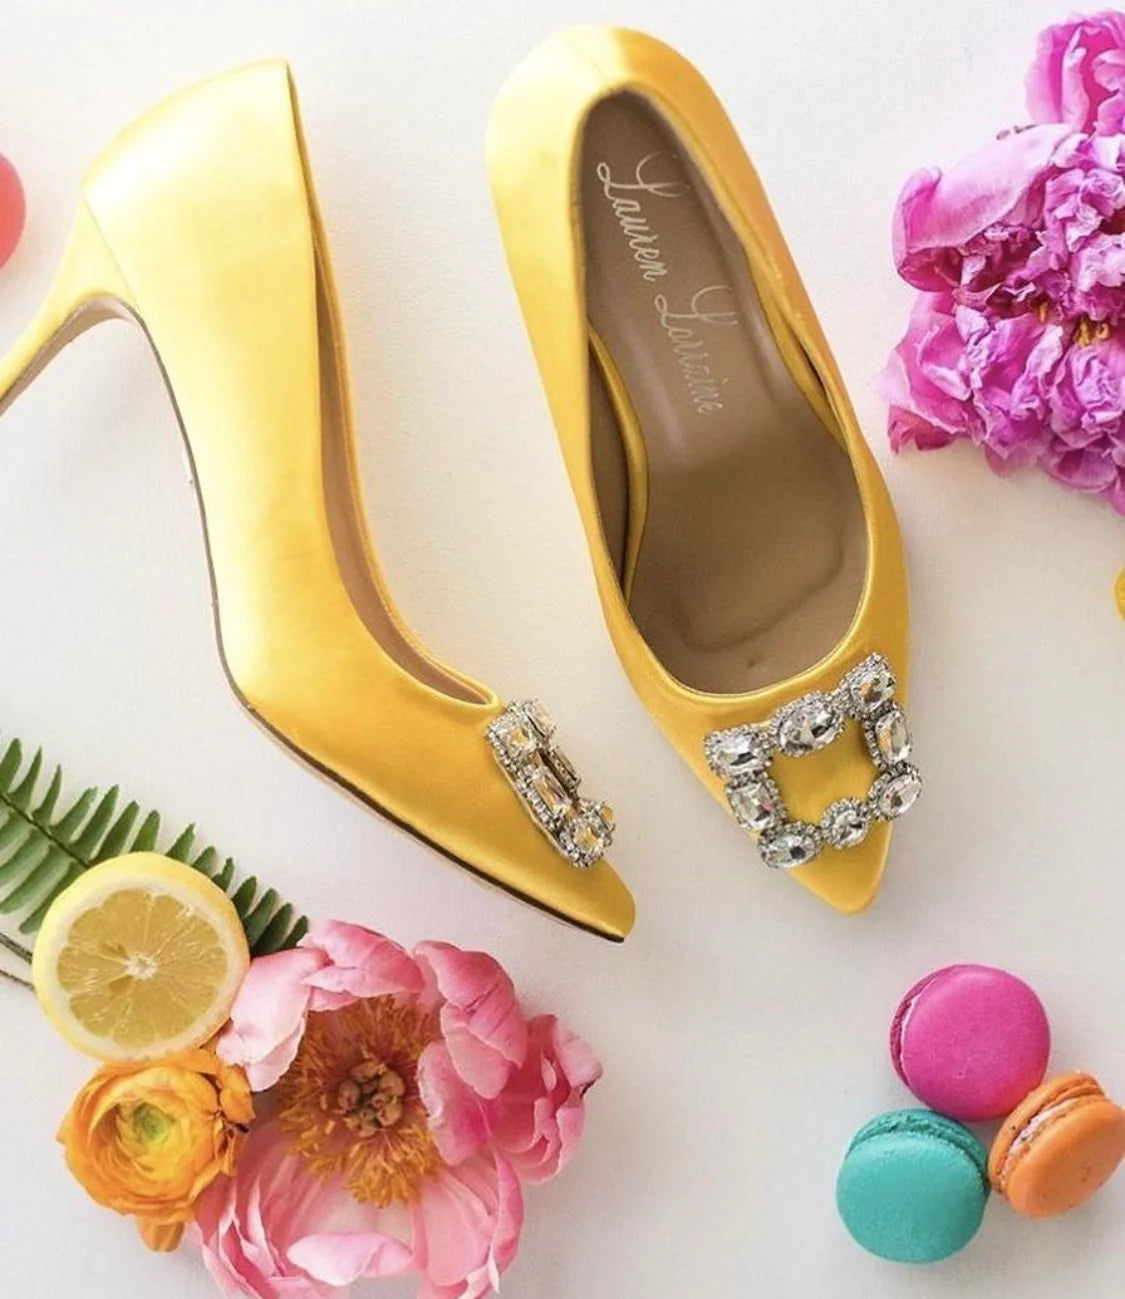 Step into Glamour with Lauren Lorraine Shoes: Red Carpet-Worthy Footwear for Every Occasion!